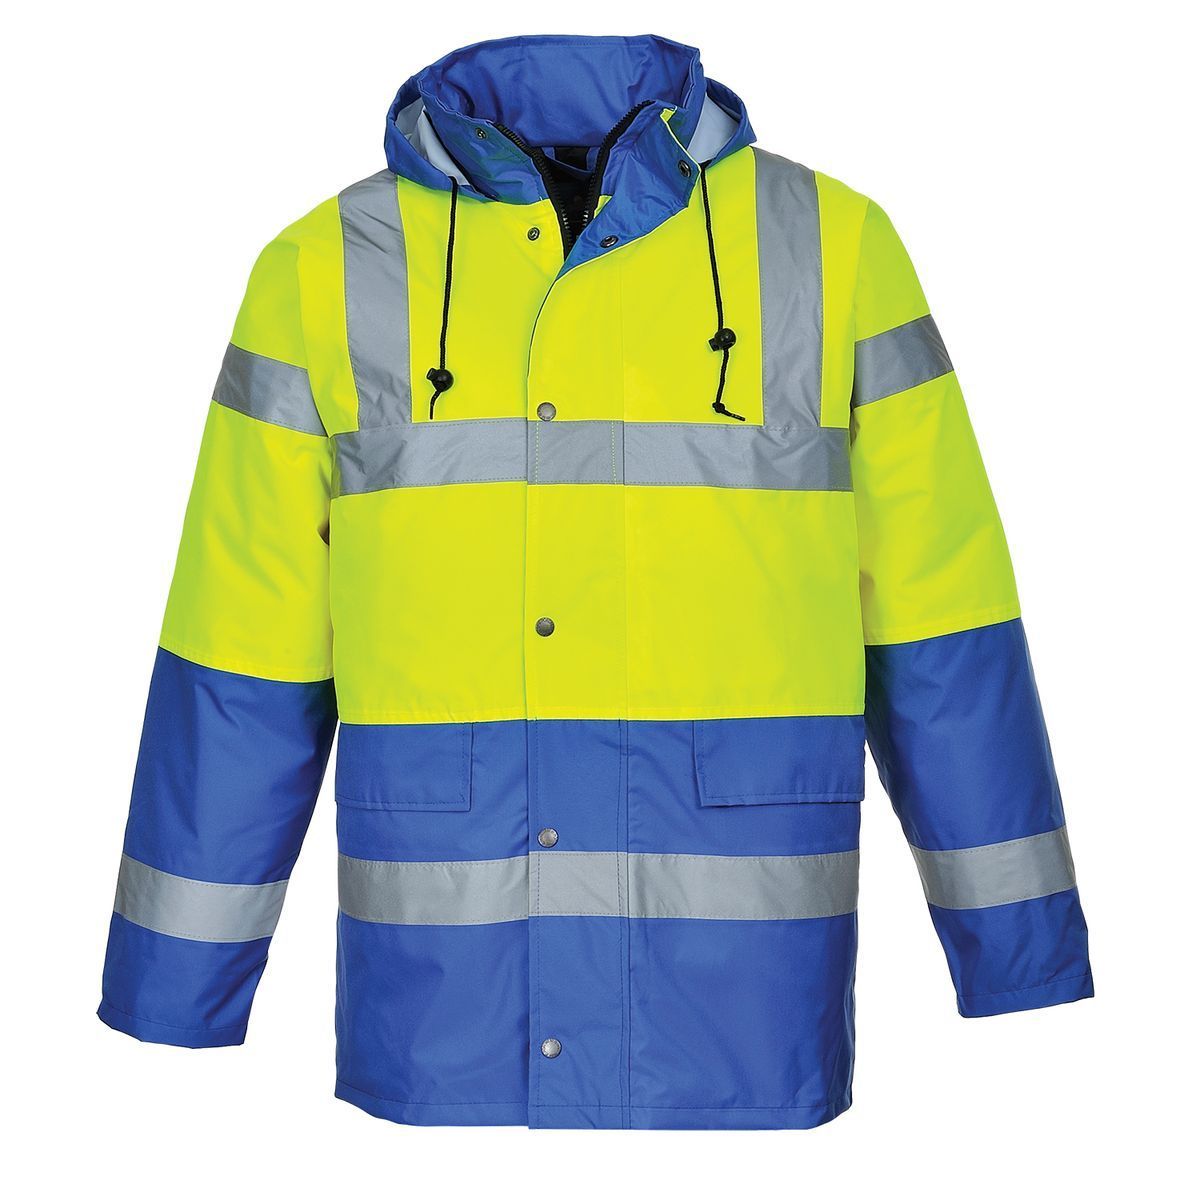 Style US466 HiVis Contrast Traffic Jacket-5